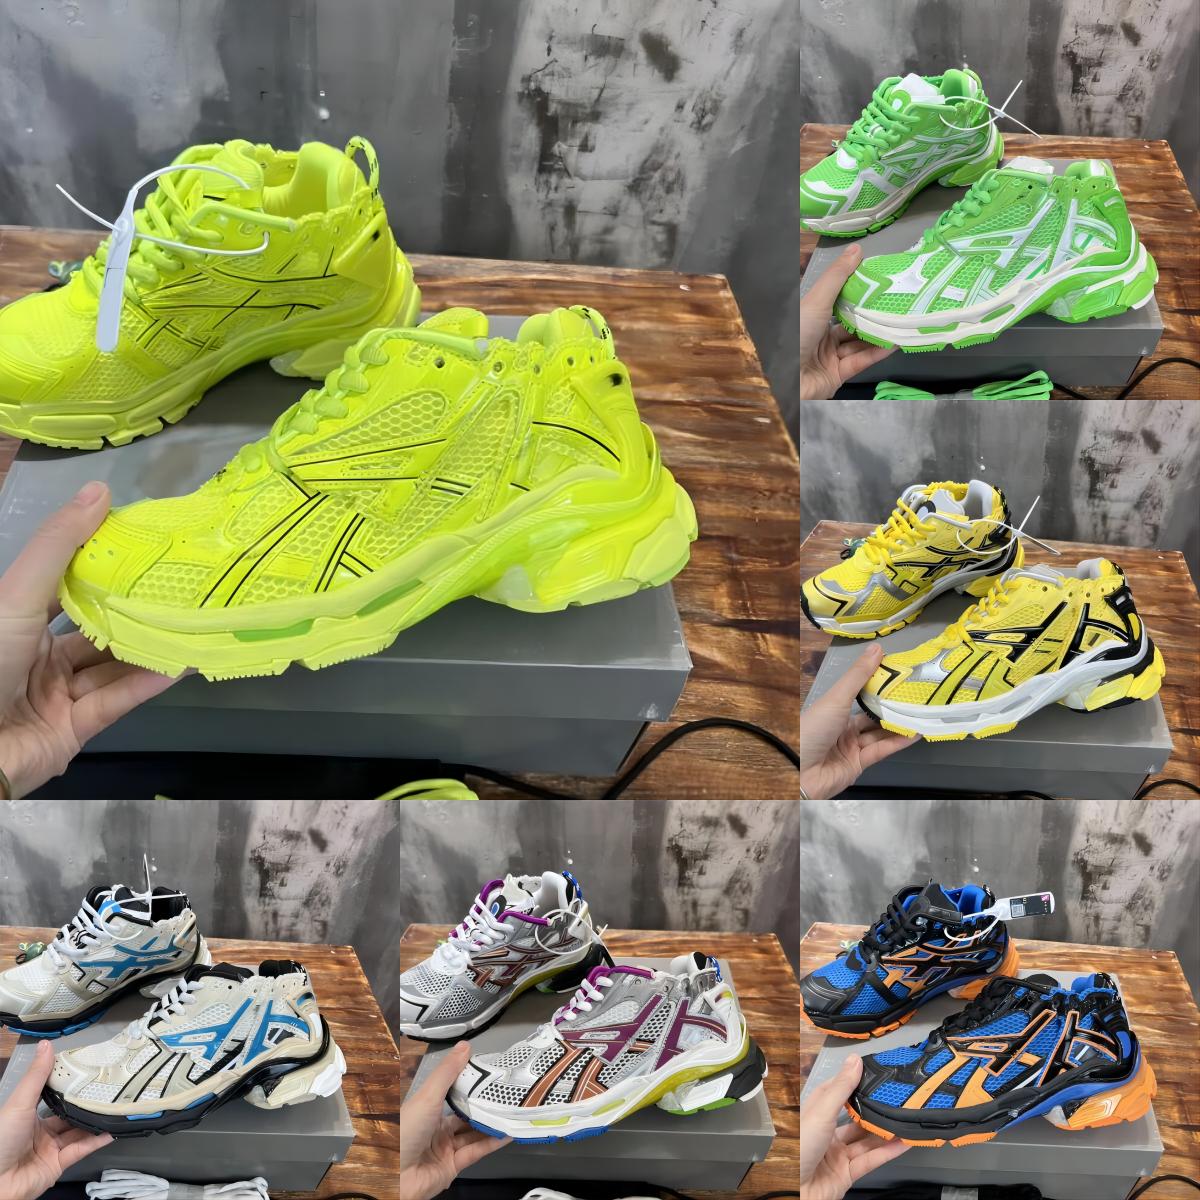 

Triple S 7.0 Runner Sneaker Shoes Designer Hottest Tracks 7 Tess Gomma Paris Speed Platform Fashion Outdoor Sports Sneakers Size 36-46, Color 4